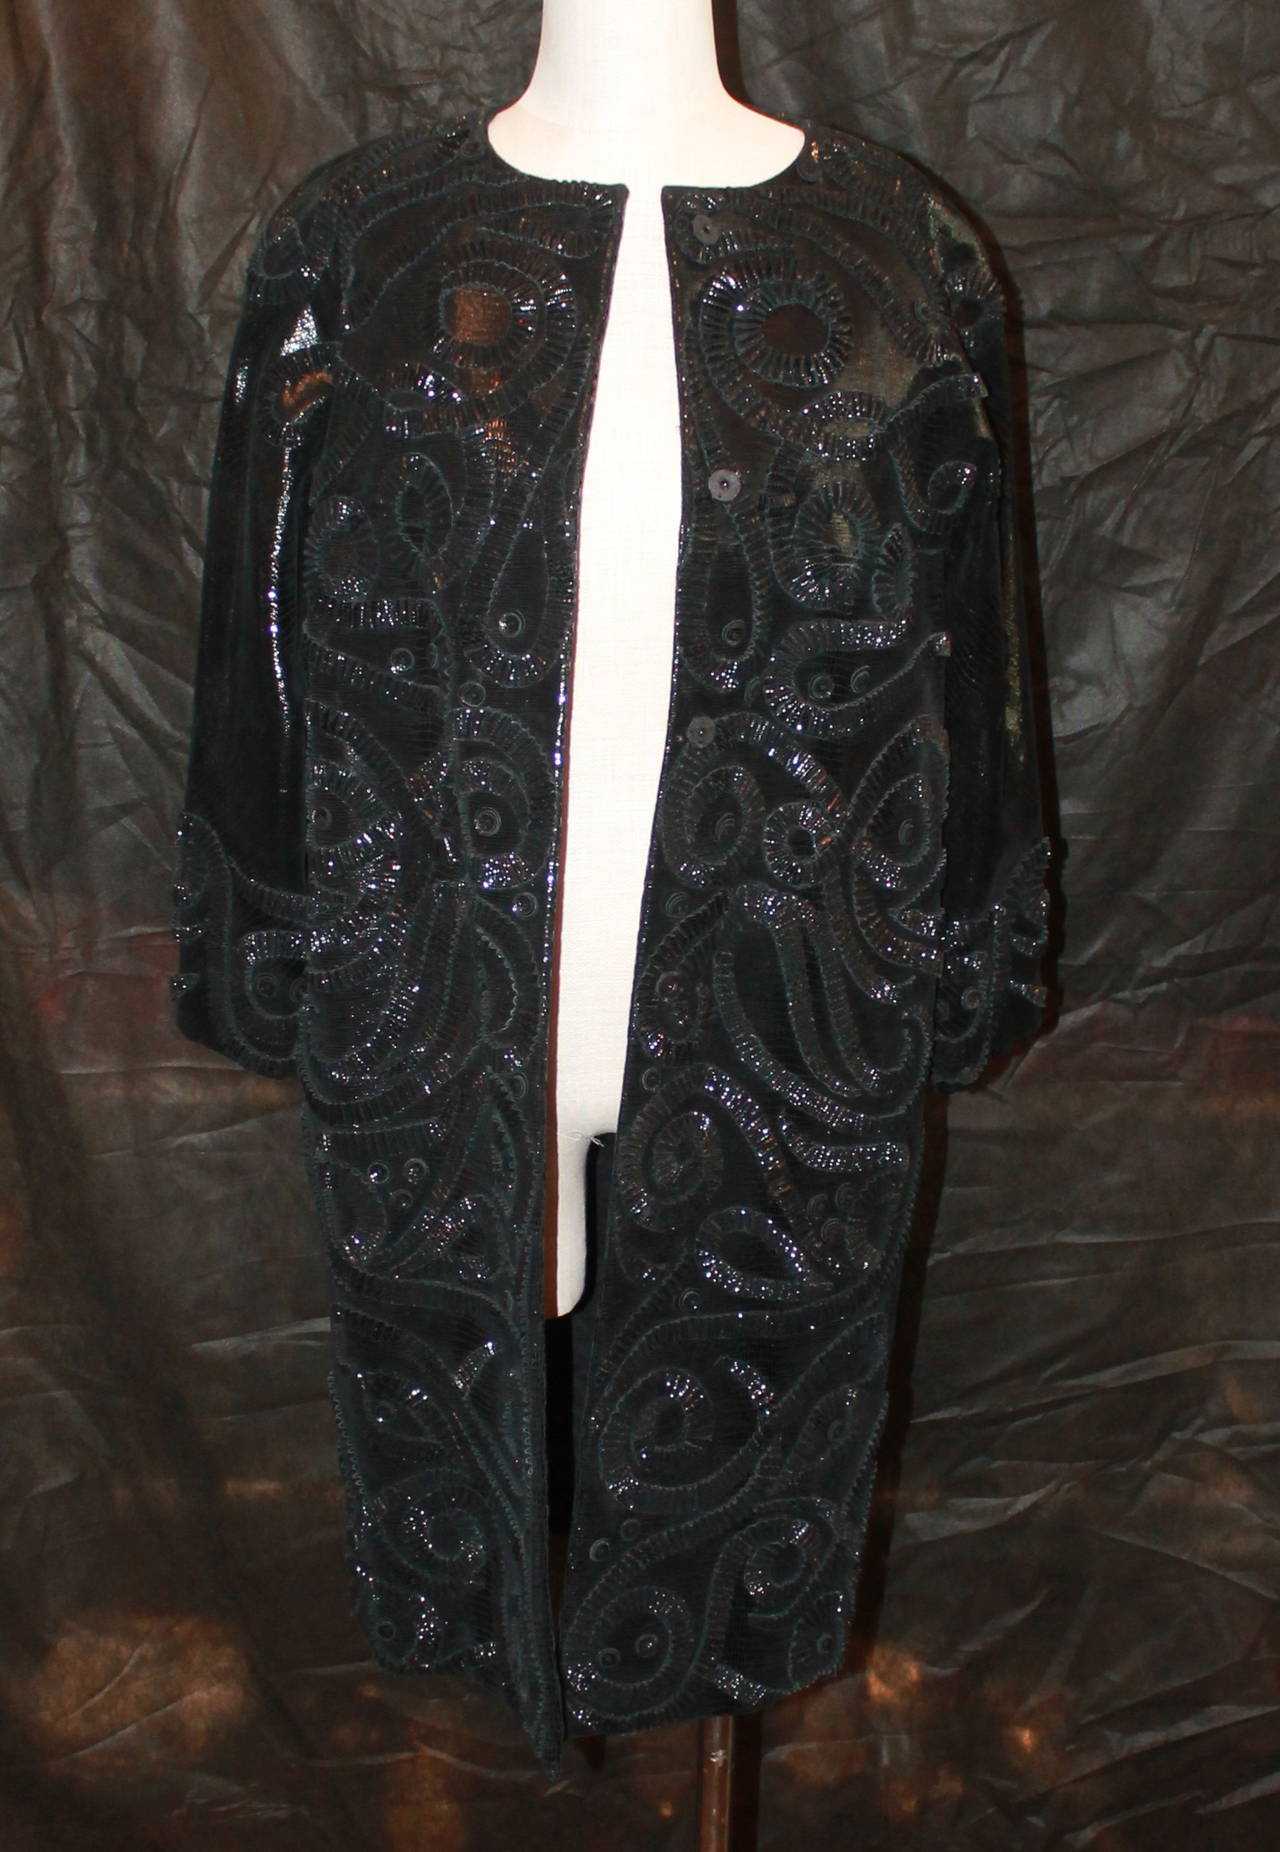 Oscar de la Renta Black Lizard Embossed Patent Embroidered Coat - M. This coat is an incredibly unique piece from the early 2000s. 

Measurements:
Sleeve Length- 19.5"
Length- 38"